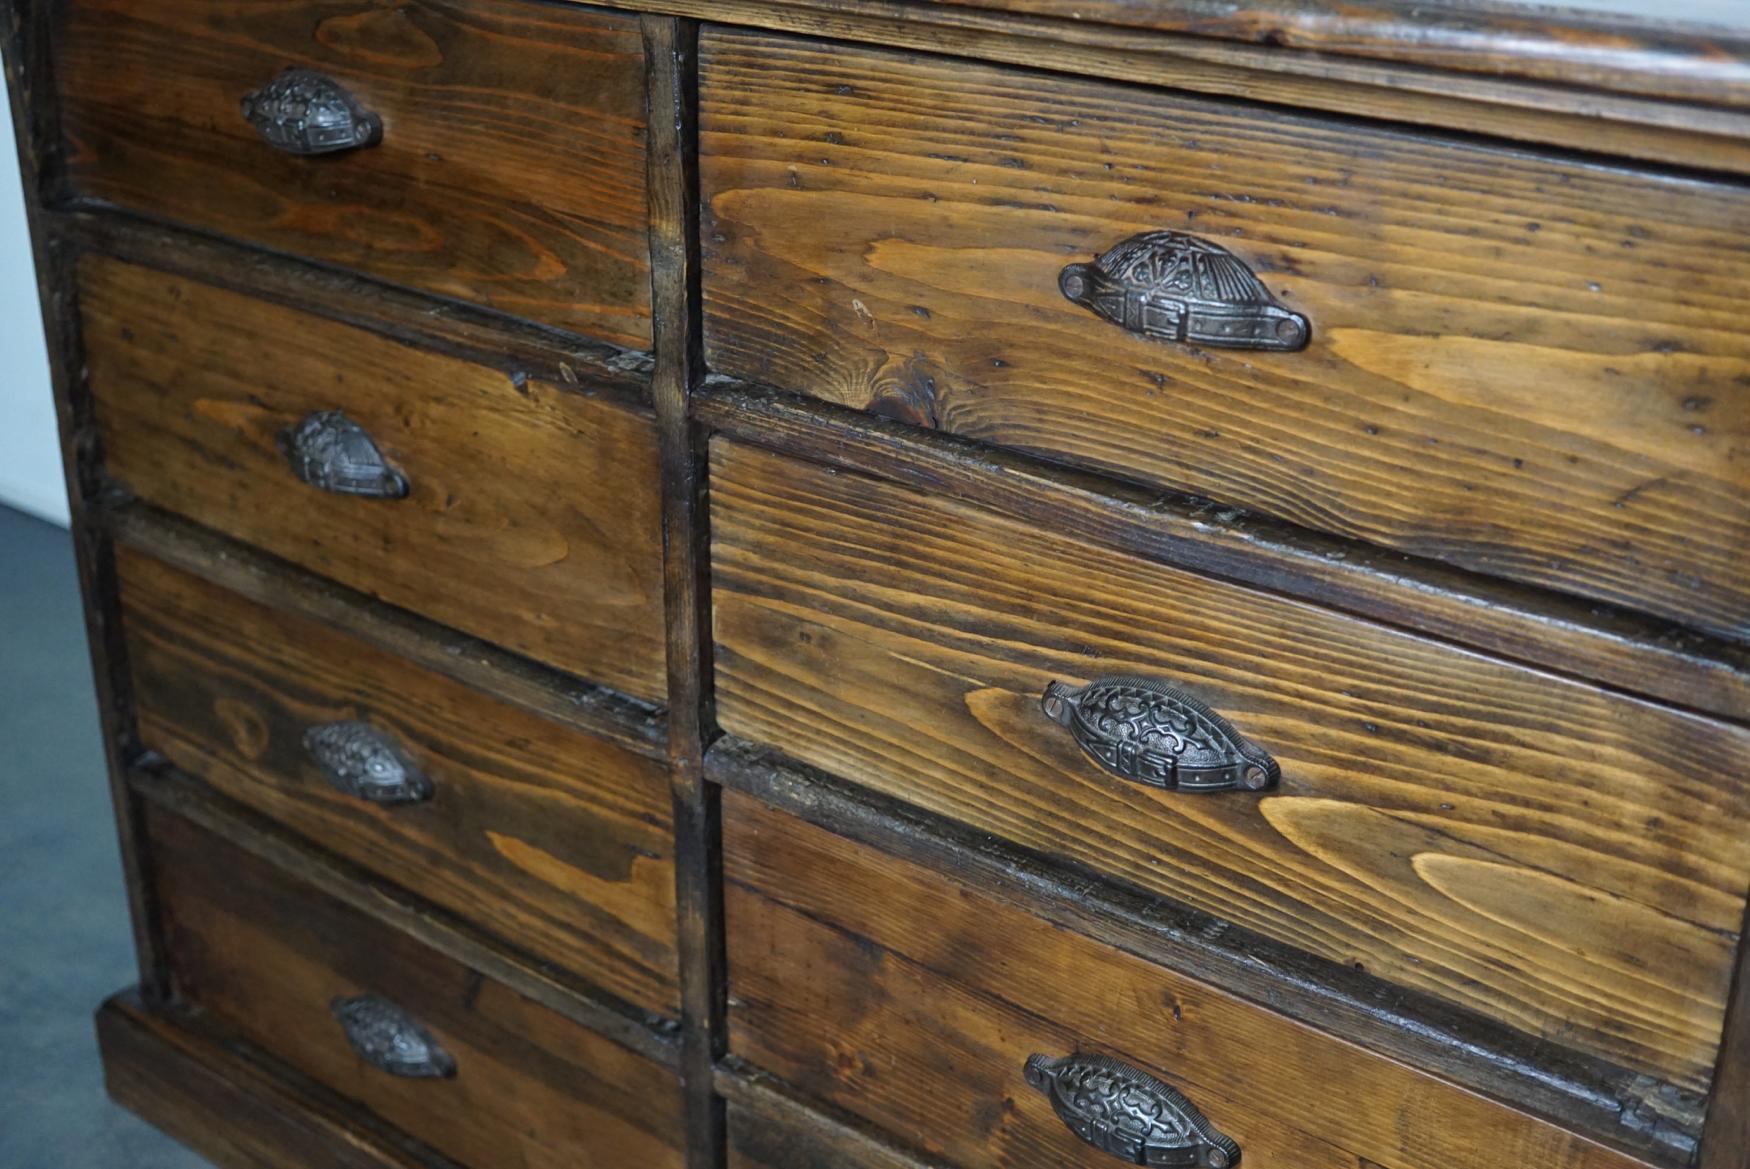 This stunning pine apothecary cabinet was made circa 1890s in France. It features 8 large drawers with ornate cast iron cup handles. It was used as a small shop counter in its early life.